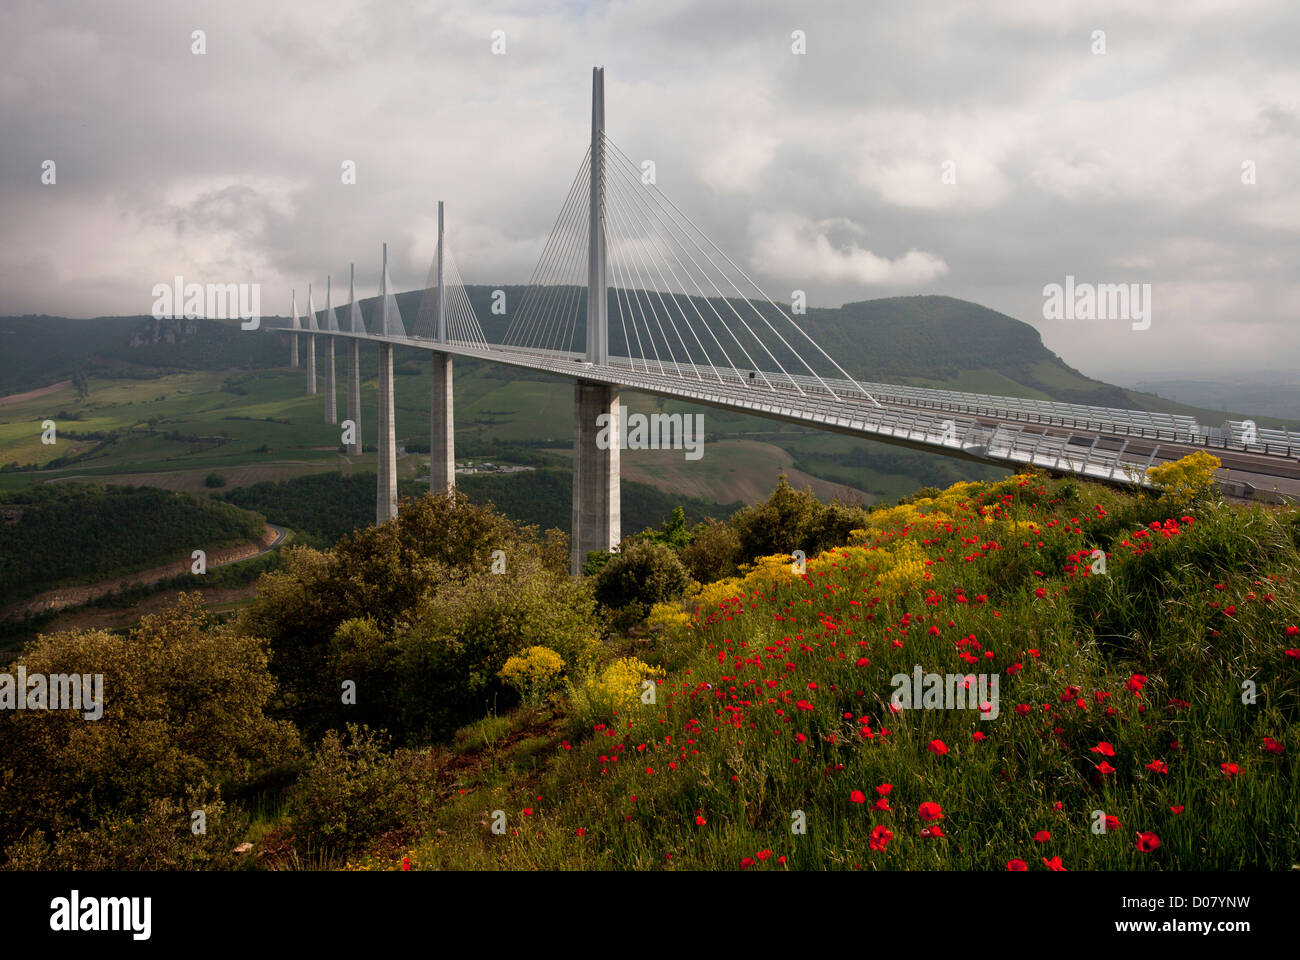 Millau viaduct or viaduc de Millau, with poppies and other flowers, on the A75 E11 autoroute, tarn gorge. Cevennes, France. Stock Photo